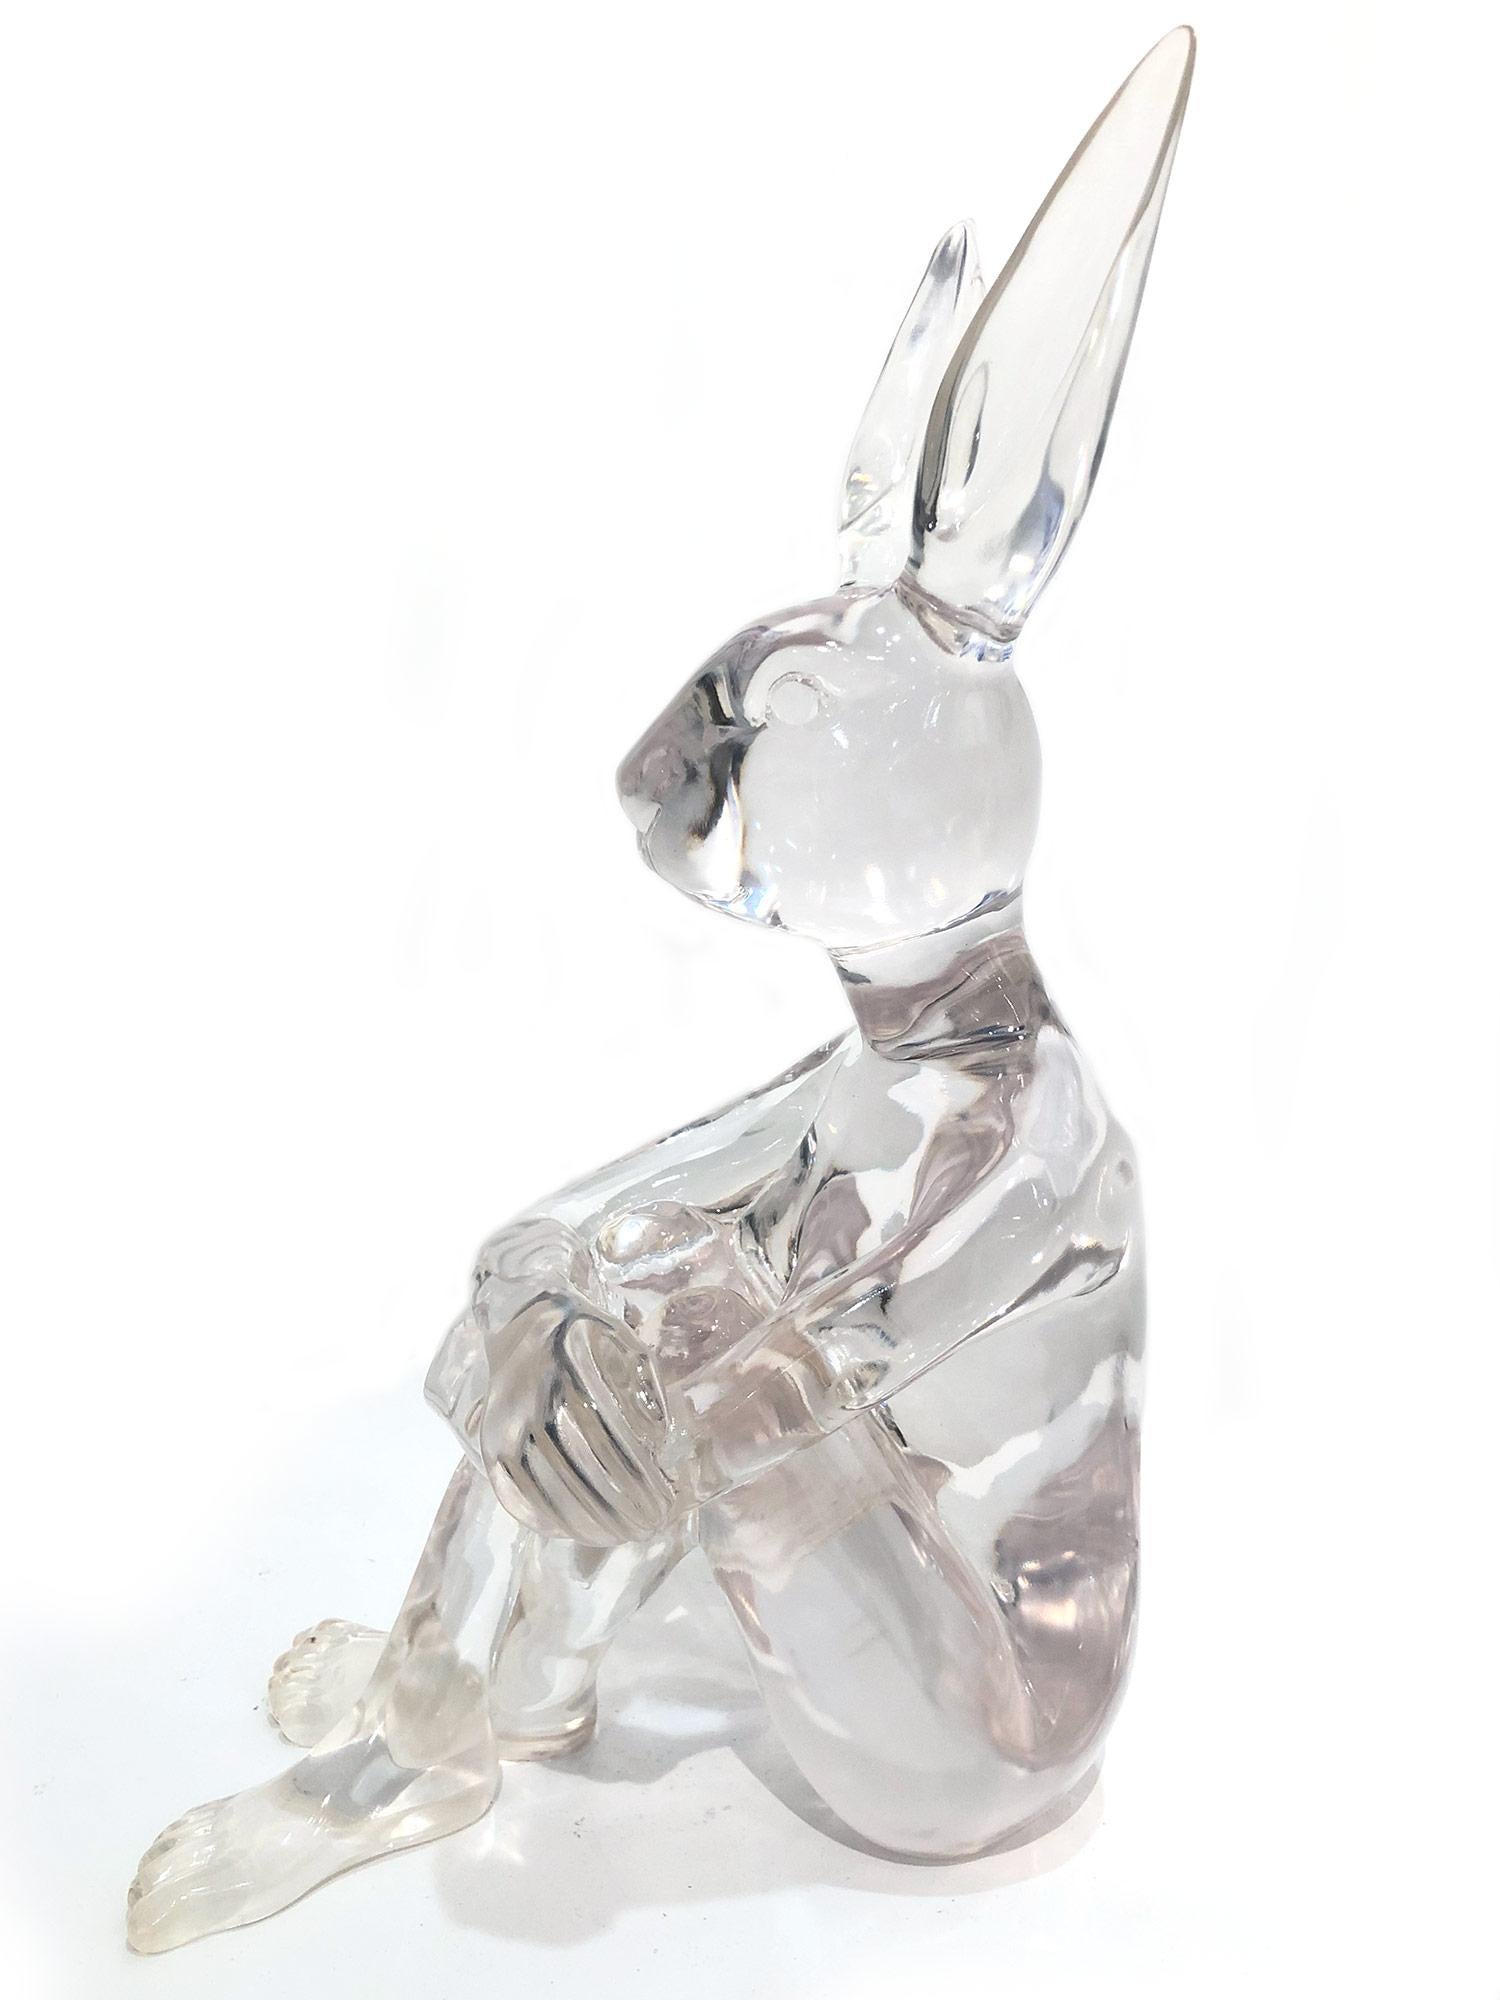 Lolly Rabbitgirl (Clear) - Pop Art Sculpture by Gillie and Marc Schattner